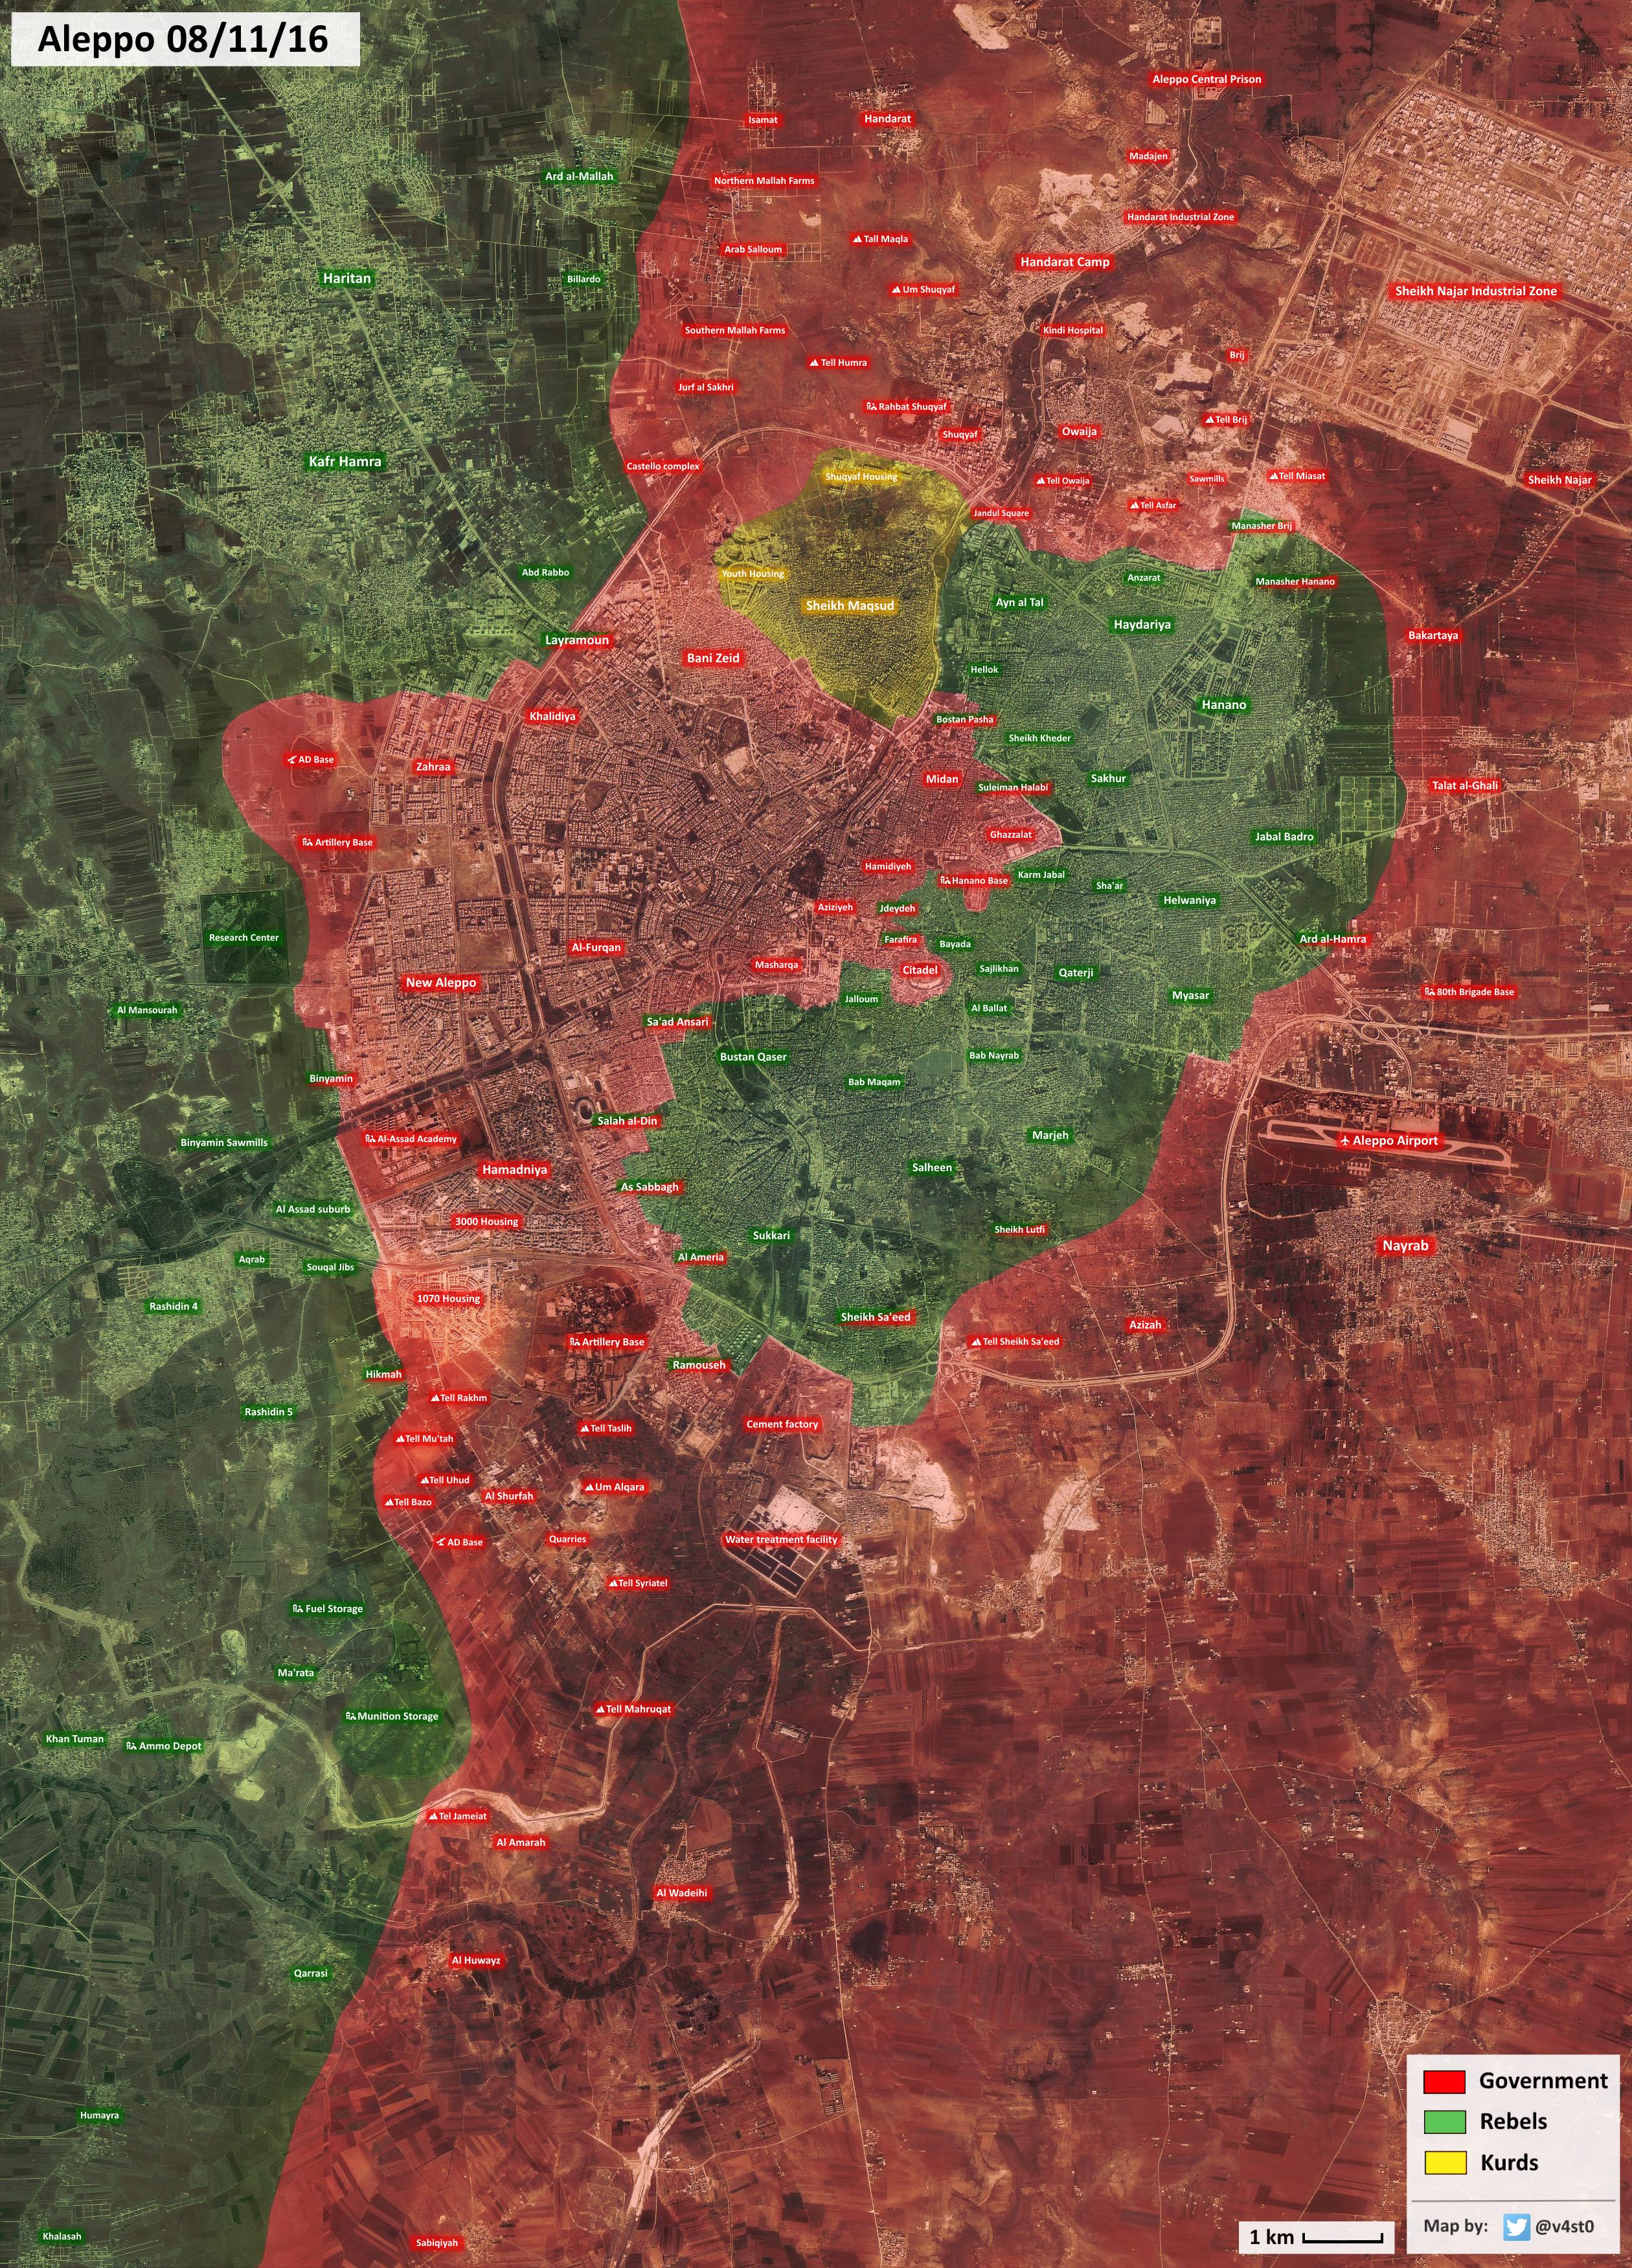 Syrian War Map Update: General Look at Military Situation in Aleppo City on November 8, 2016